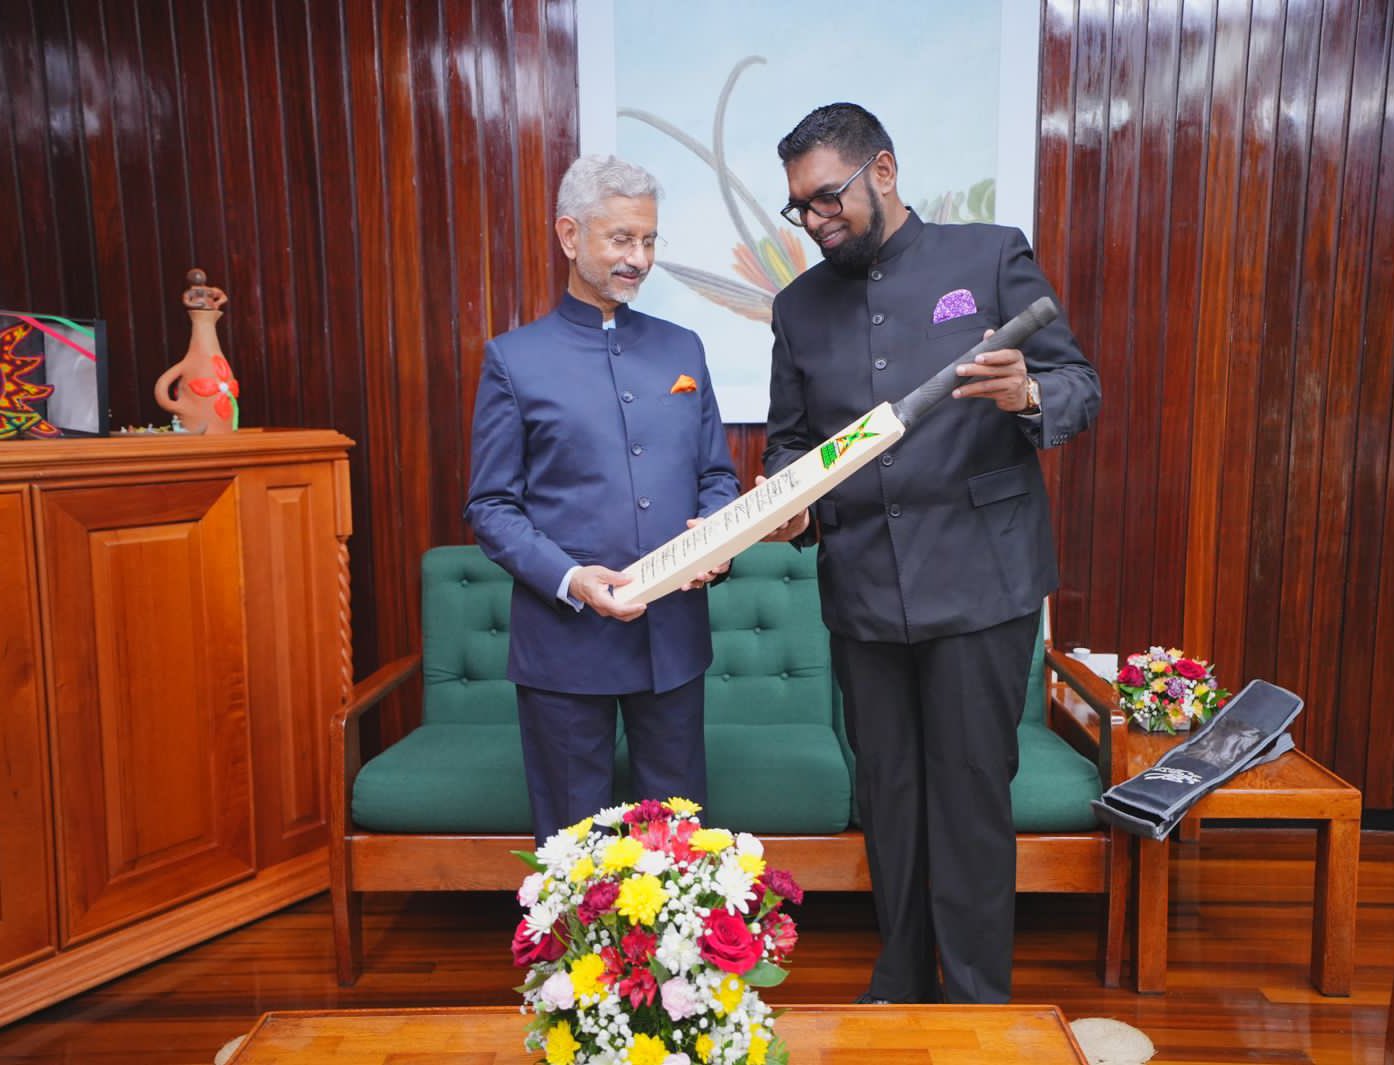 The Indian EAM received a benevolent gift of a cricket bat and a jersey with his name on it from the president and the vice president.